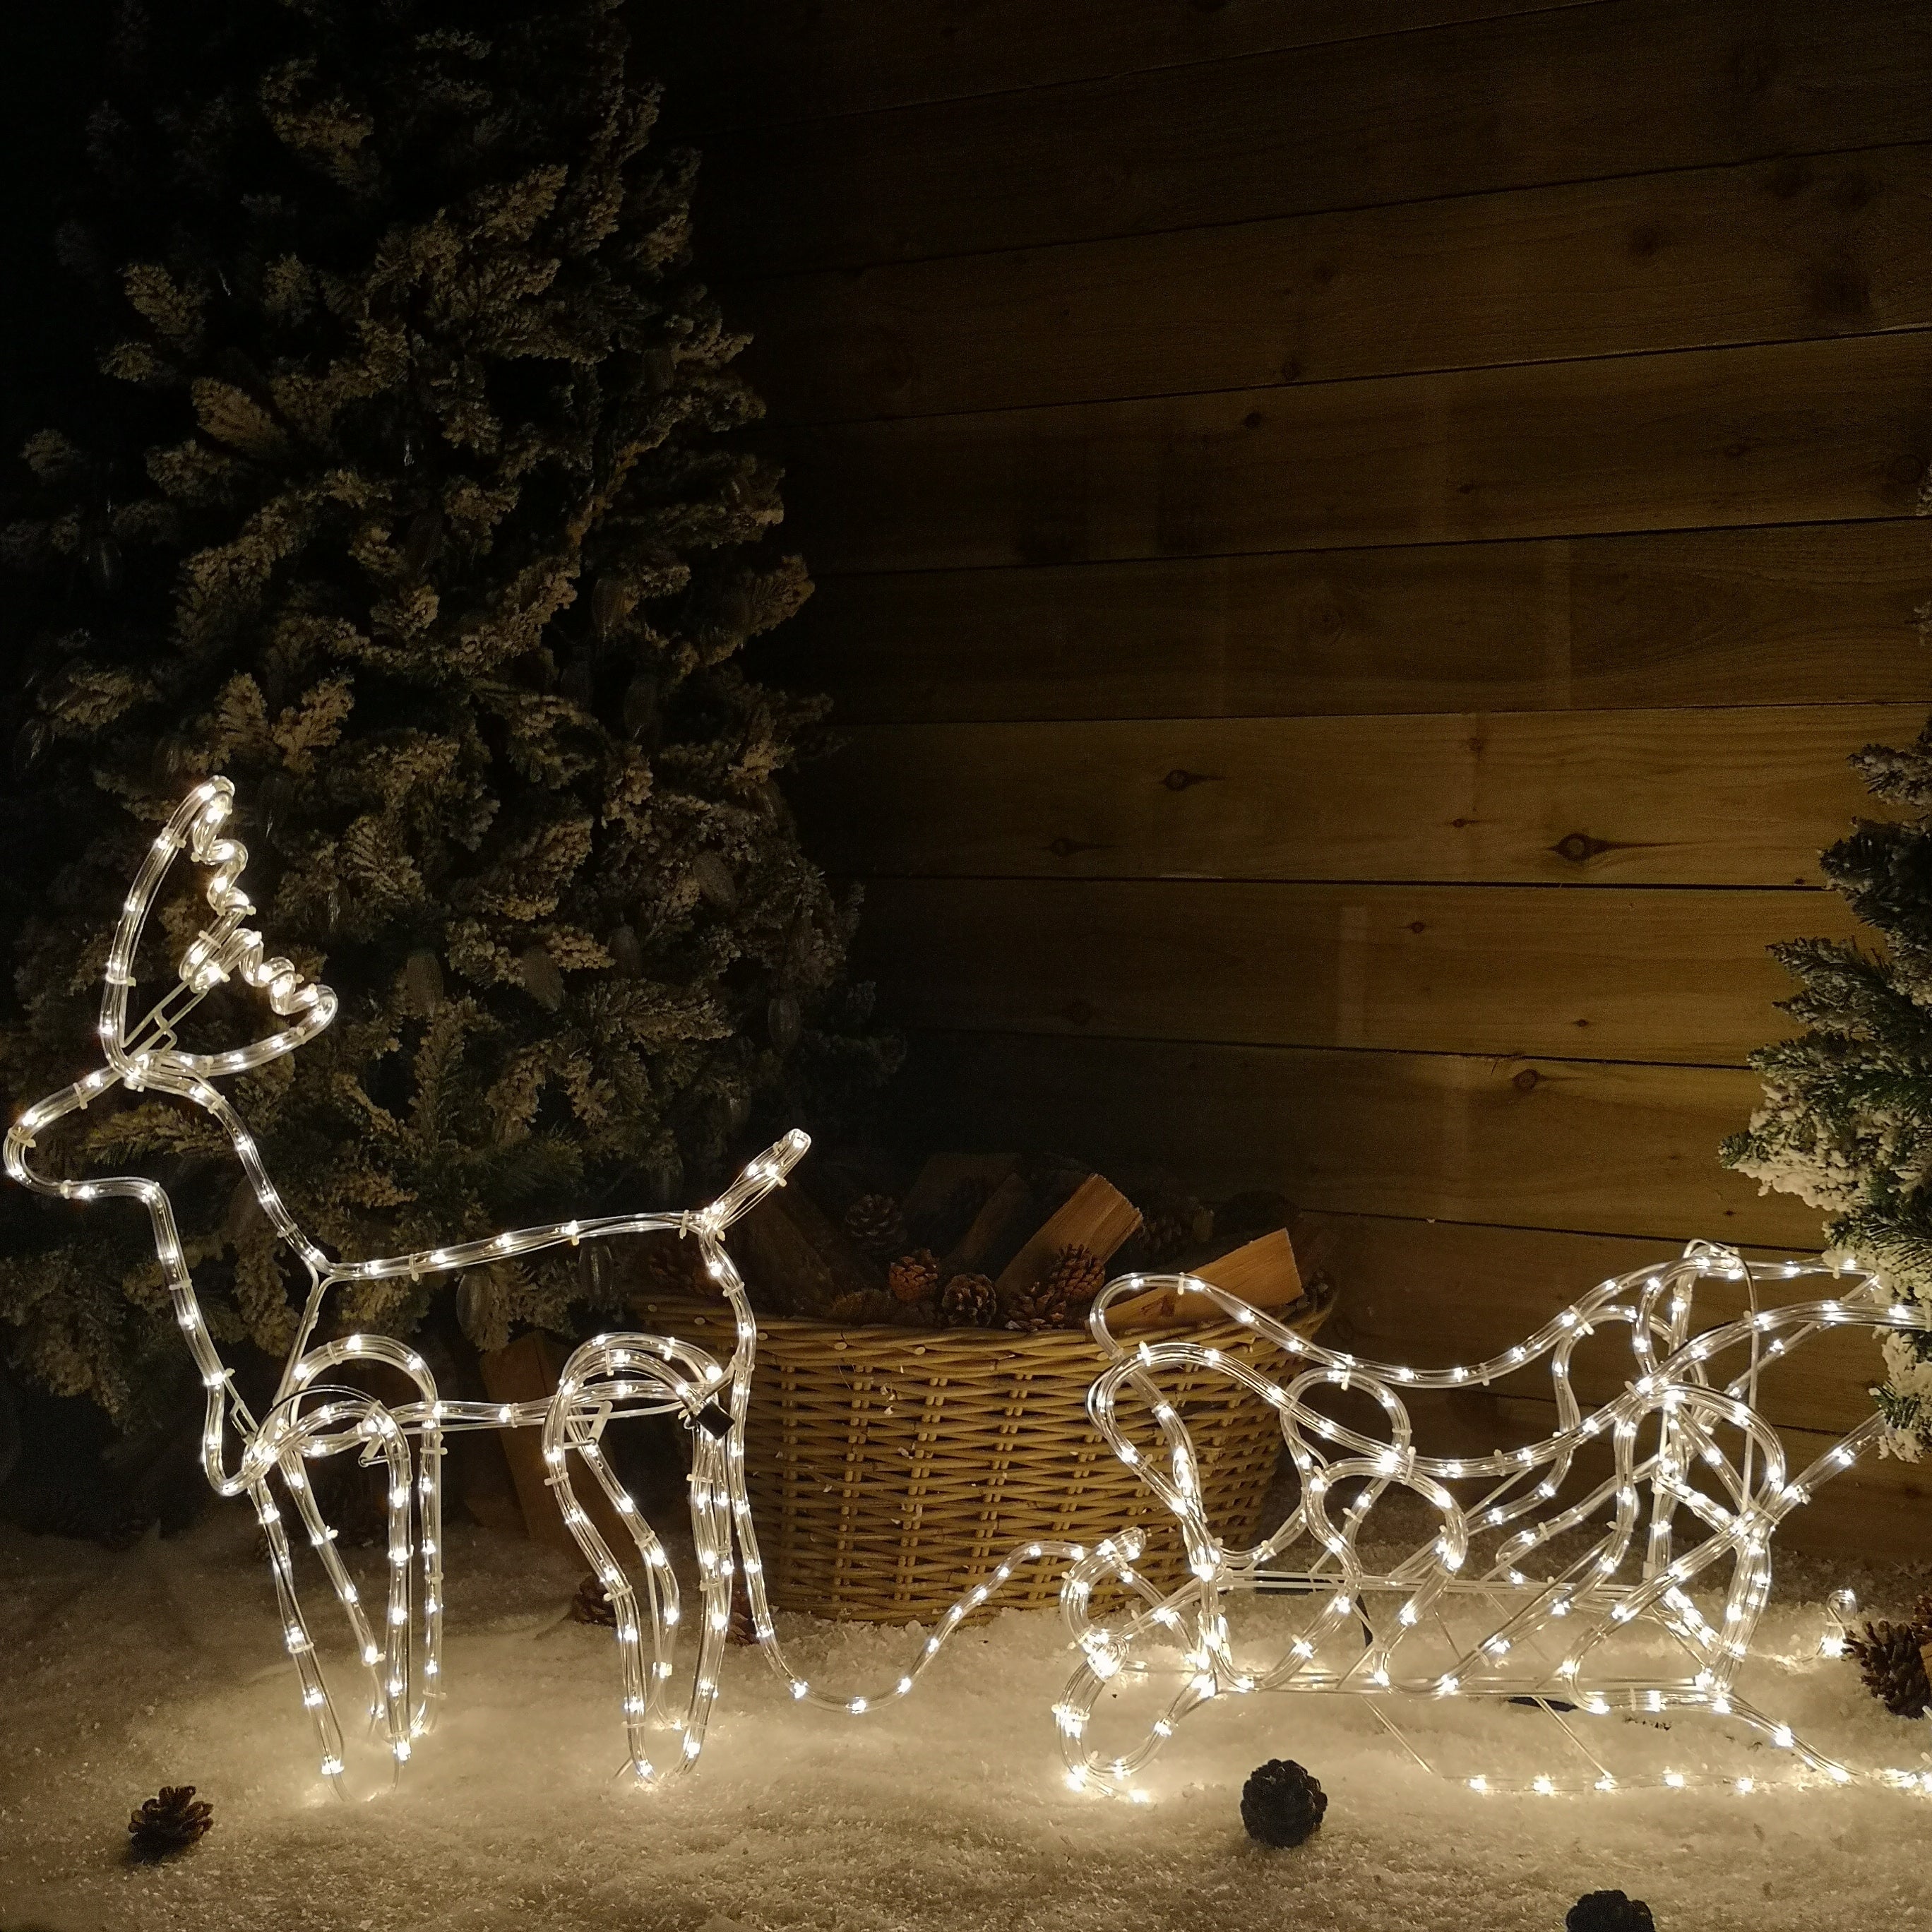 1.4m LED Rope Light Reindeer with Sleigh Christmas Decoration in White